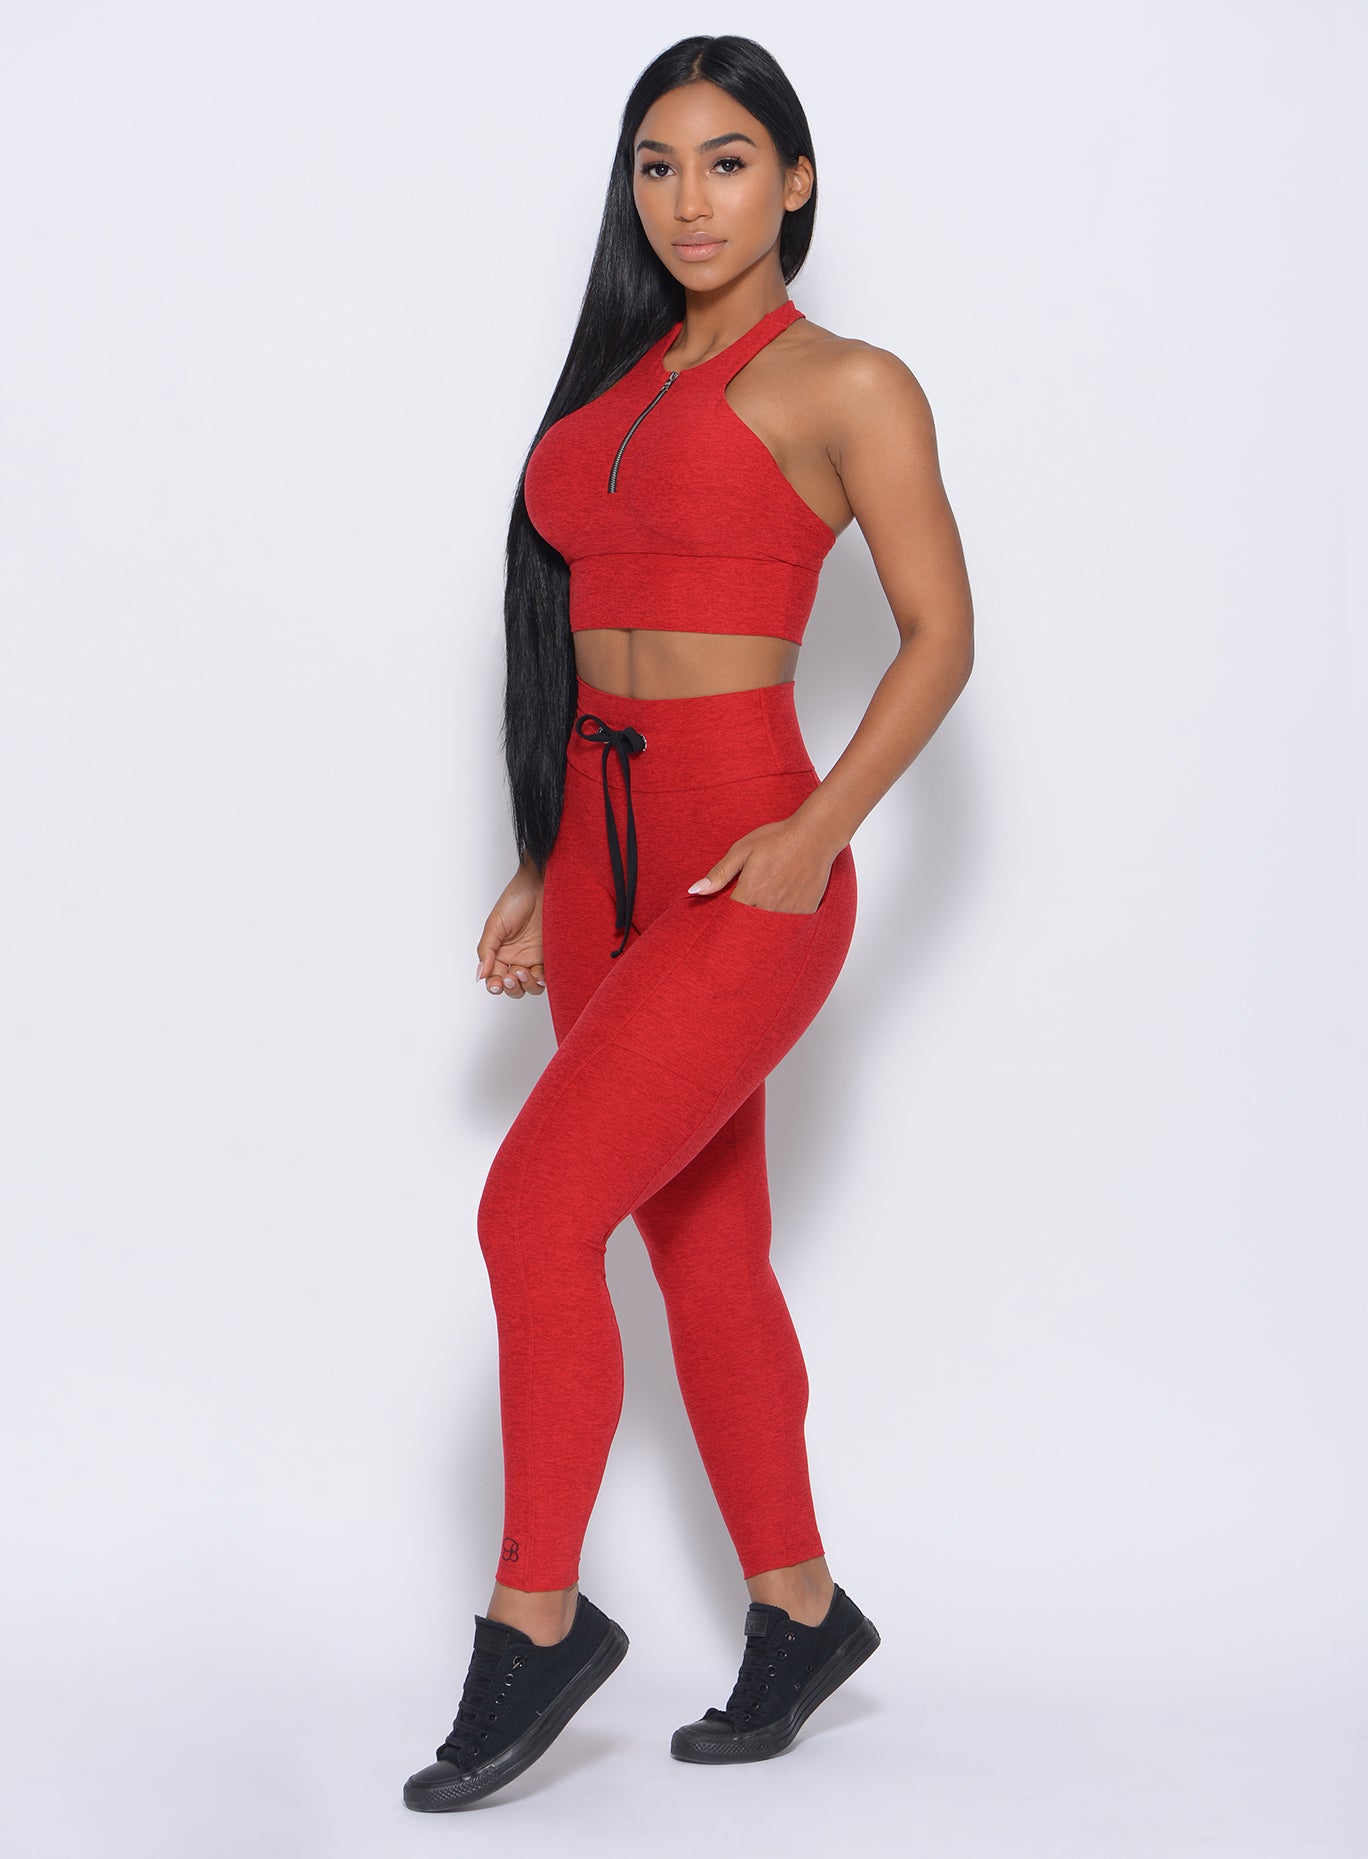 Left side view of the model  angled left wearing our thrive leggings in sunset red color and a matching bra